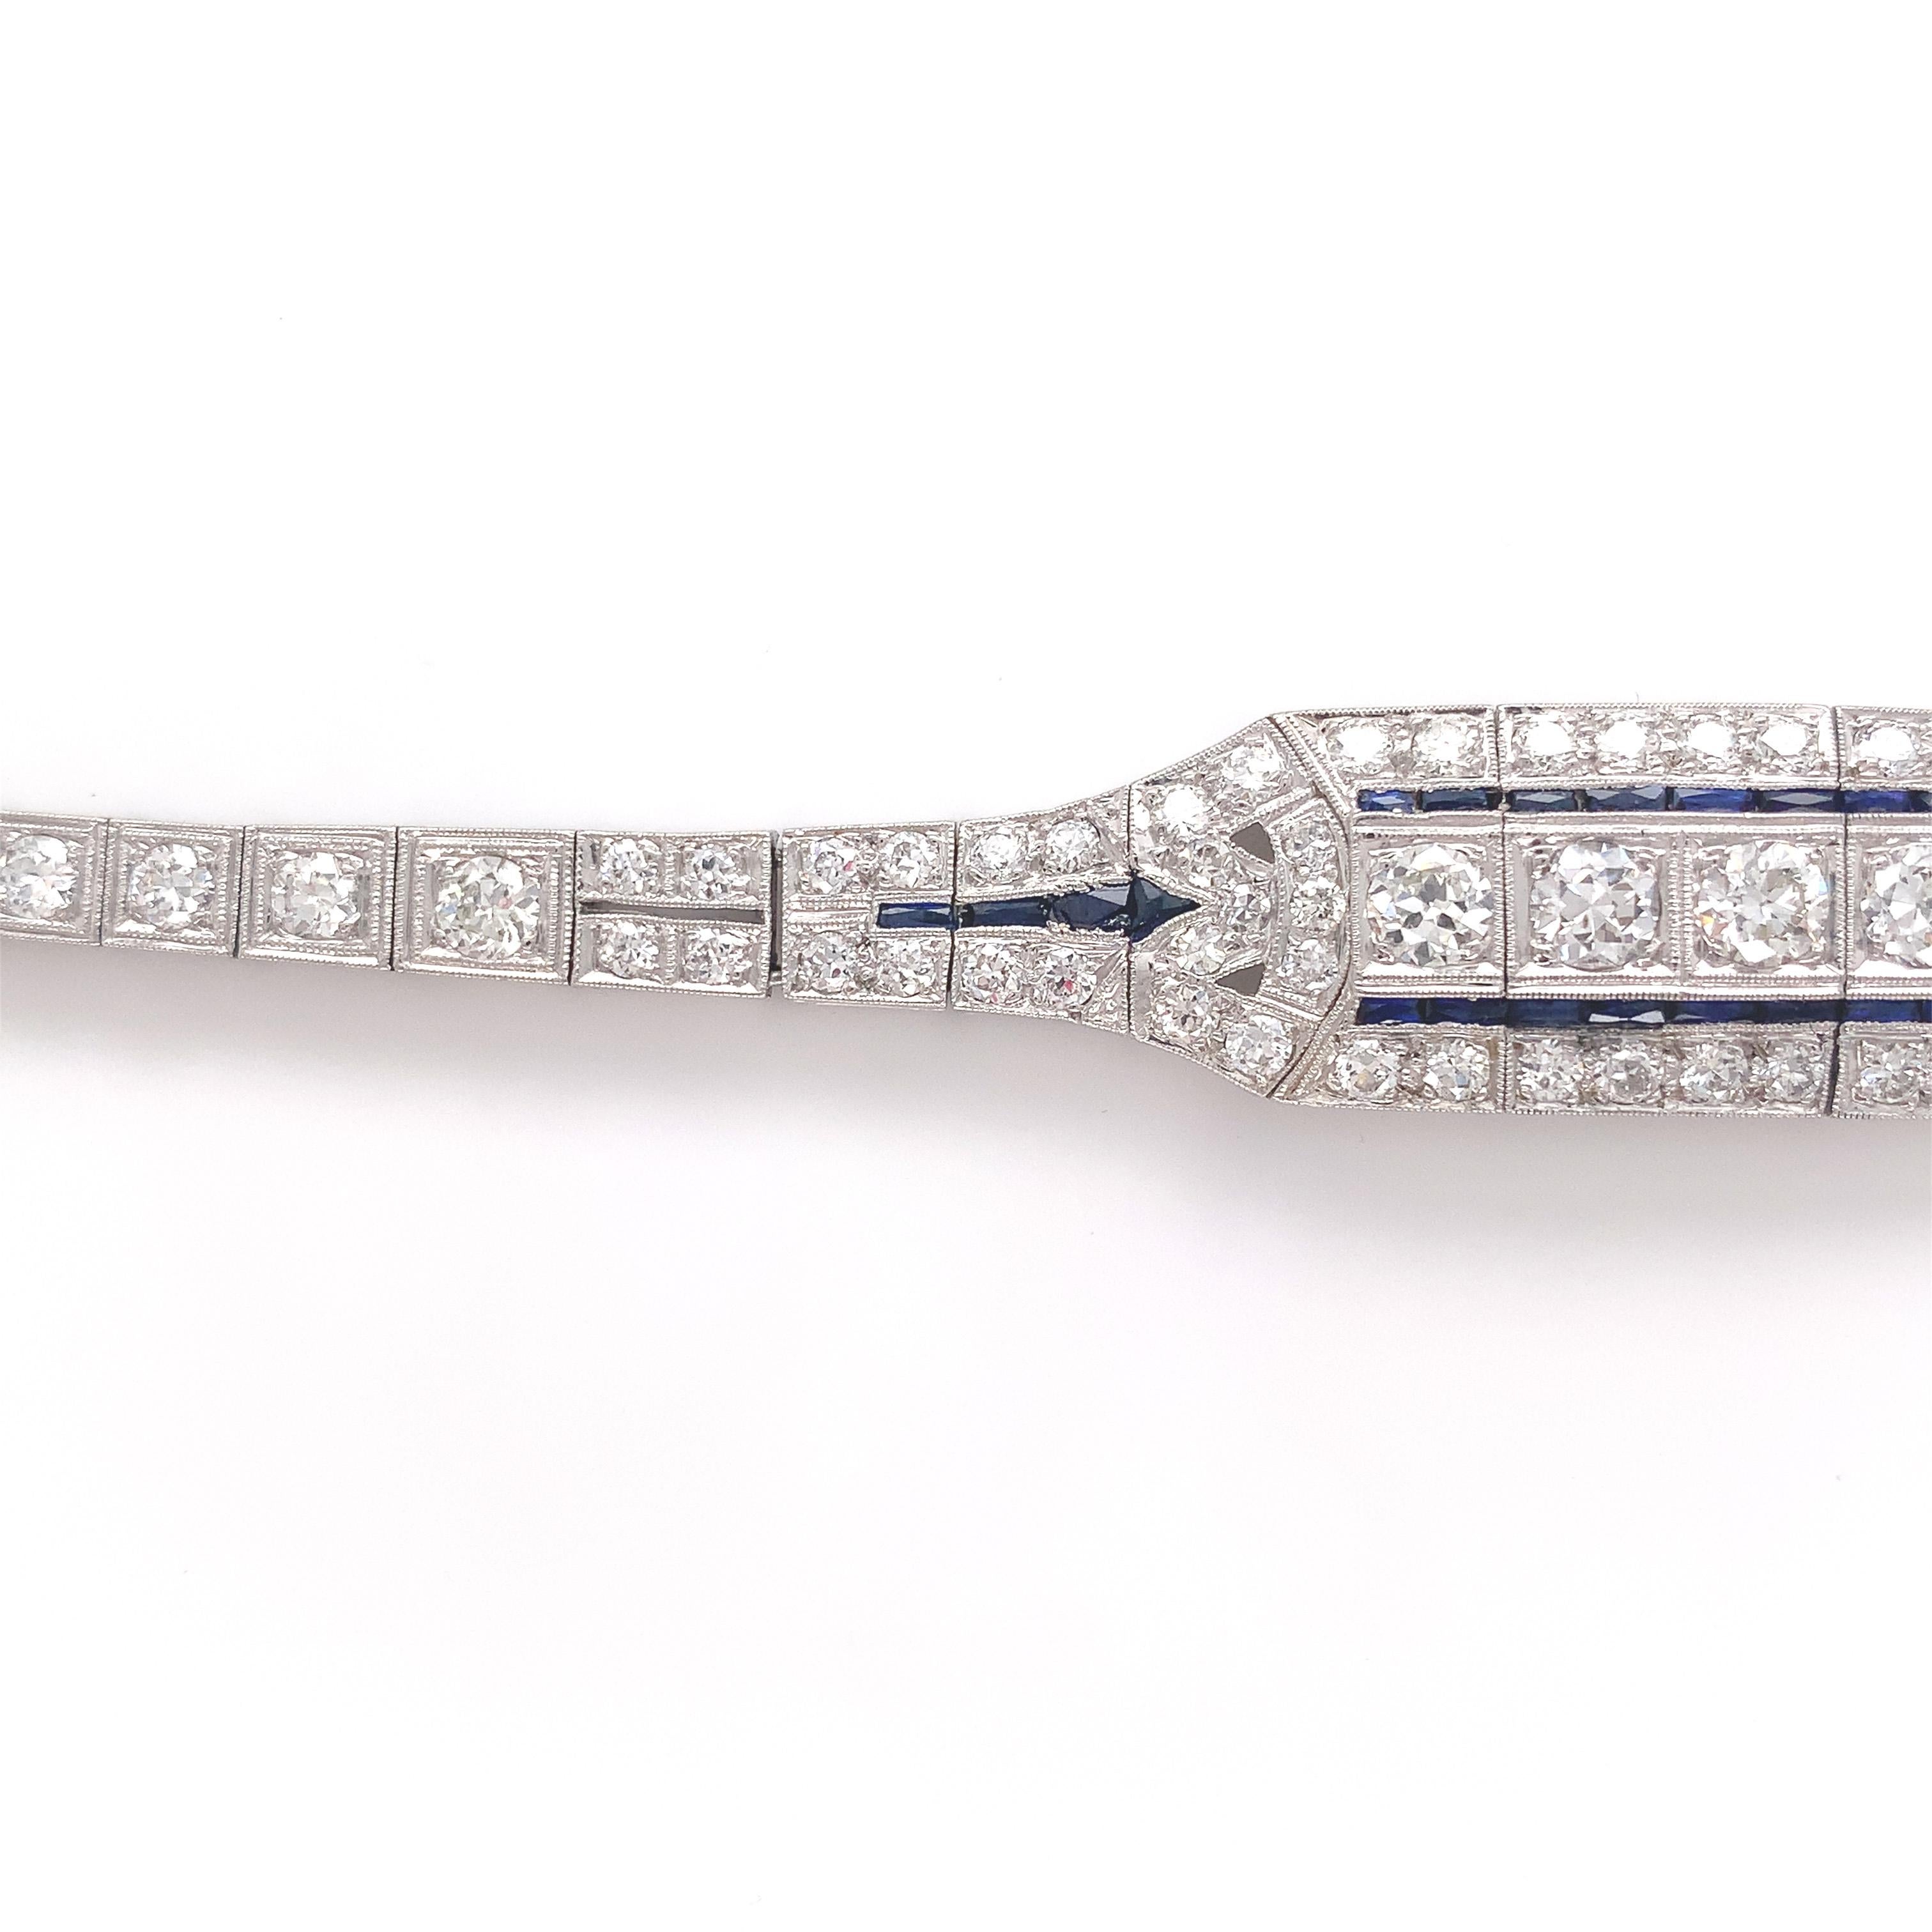 Antique platinum Art Deco diamond bracelet featuring about 4.25 carats of diamonds accented by calibre cut synthetic blue sapphires. The bracelet has crisp detail with milgrain and piercing. There are a total of 88 diamonds including 4 larger